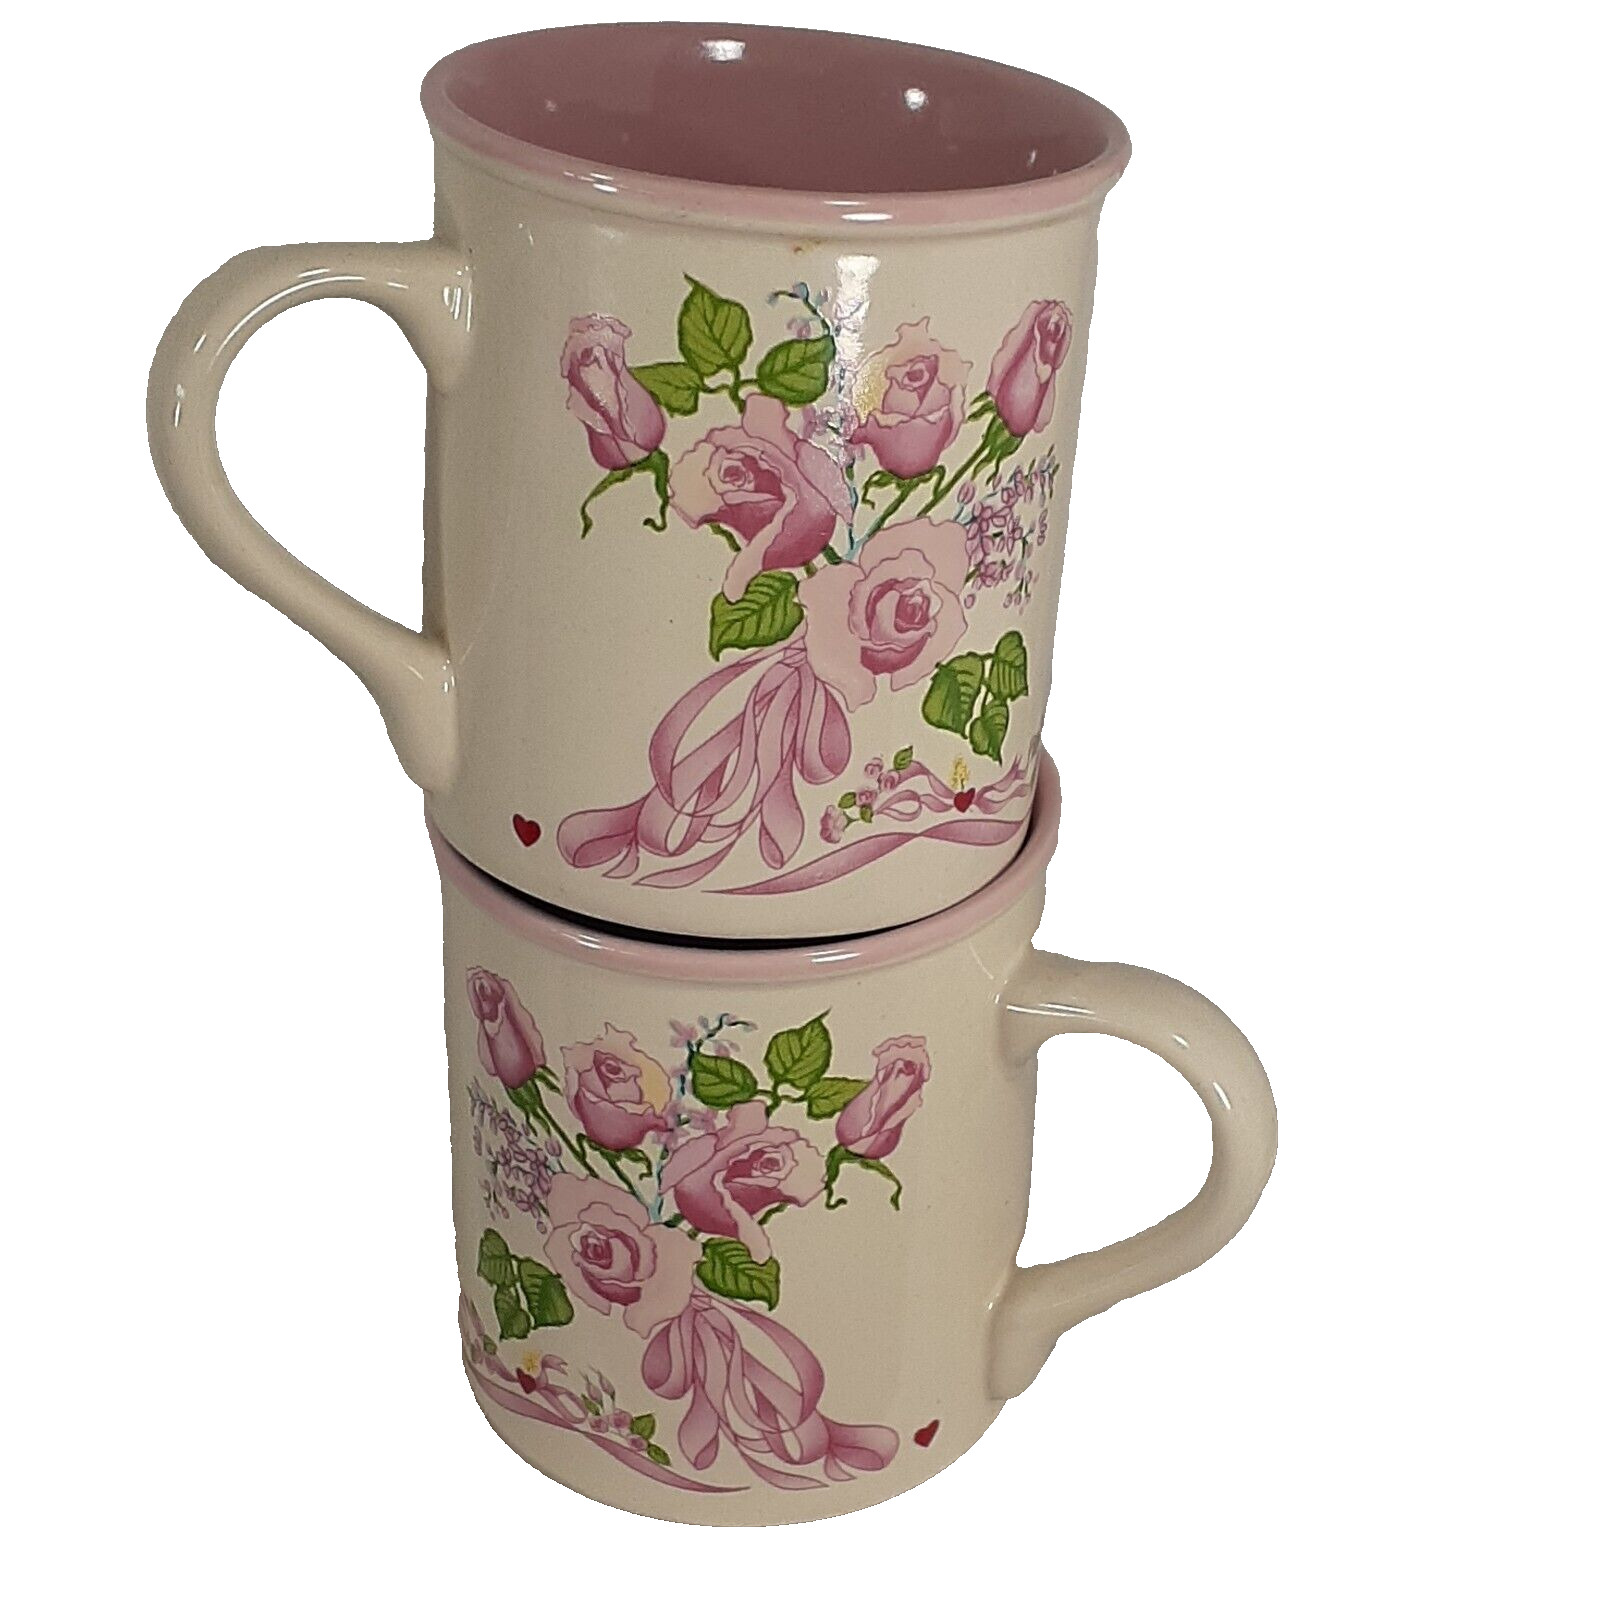 Two Coffee Tea Mugs The Company of Choice Potpourri Press 1987 Cups Pink Roses